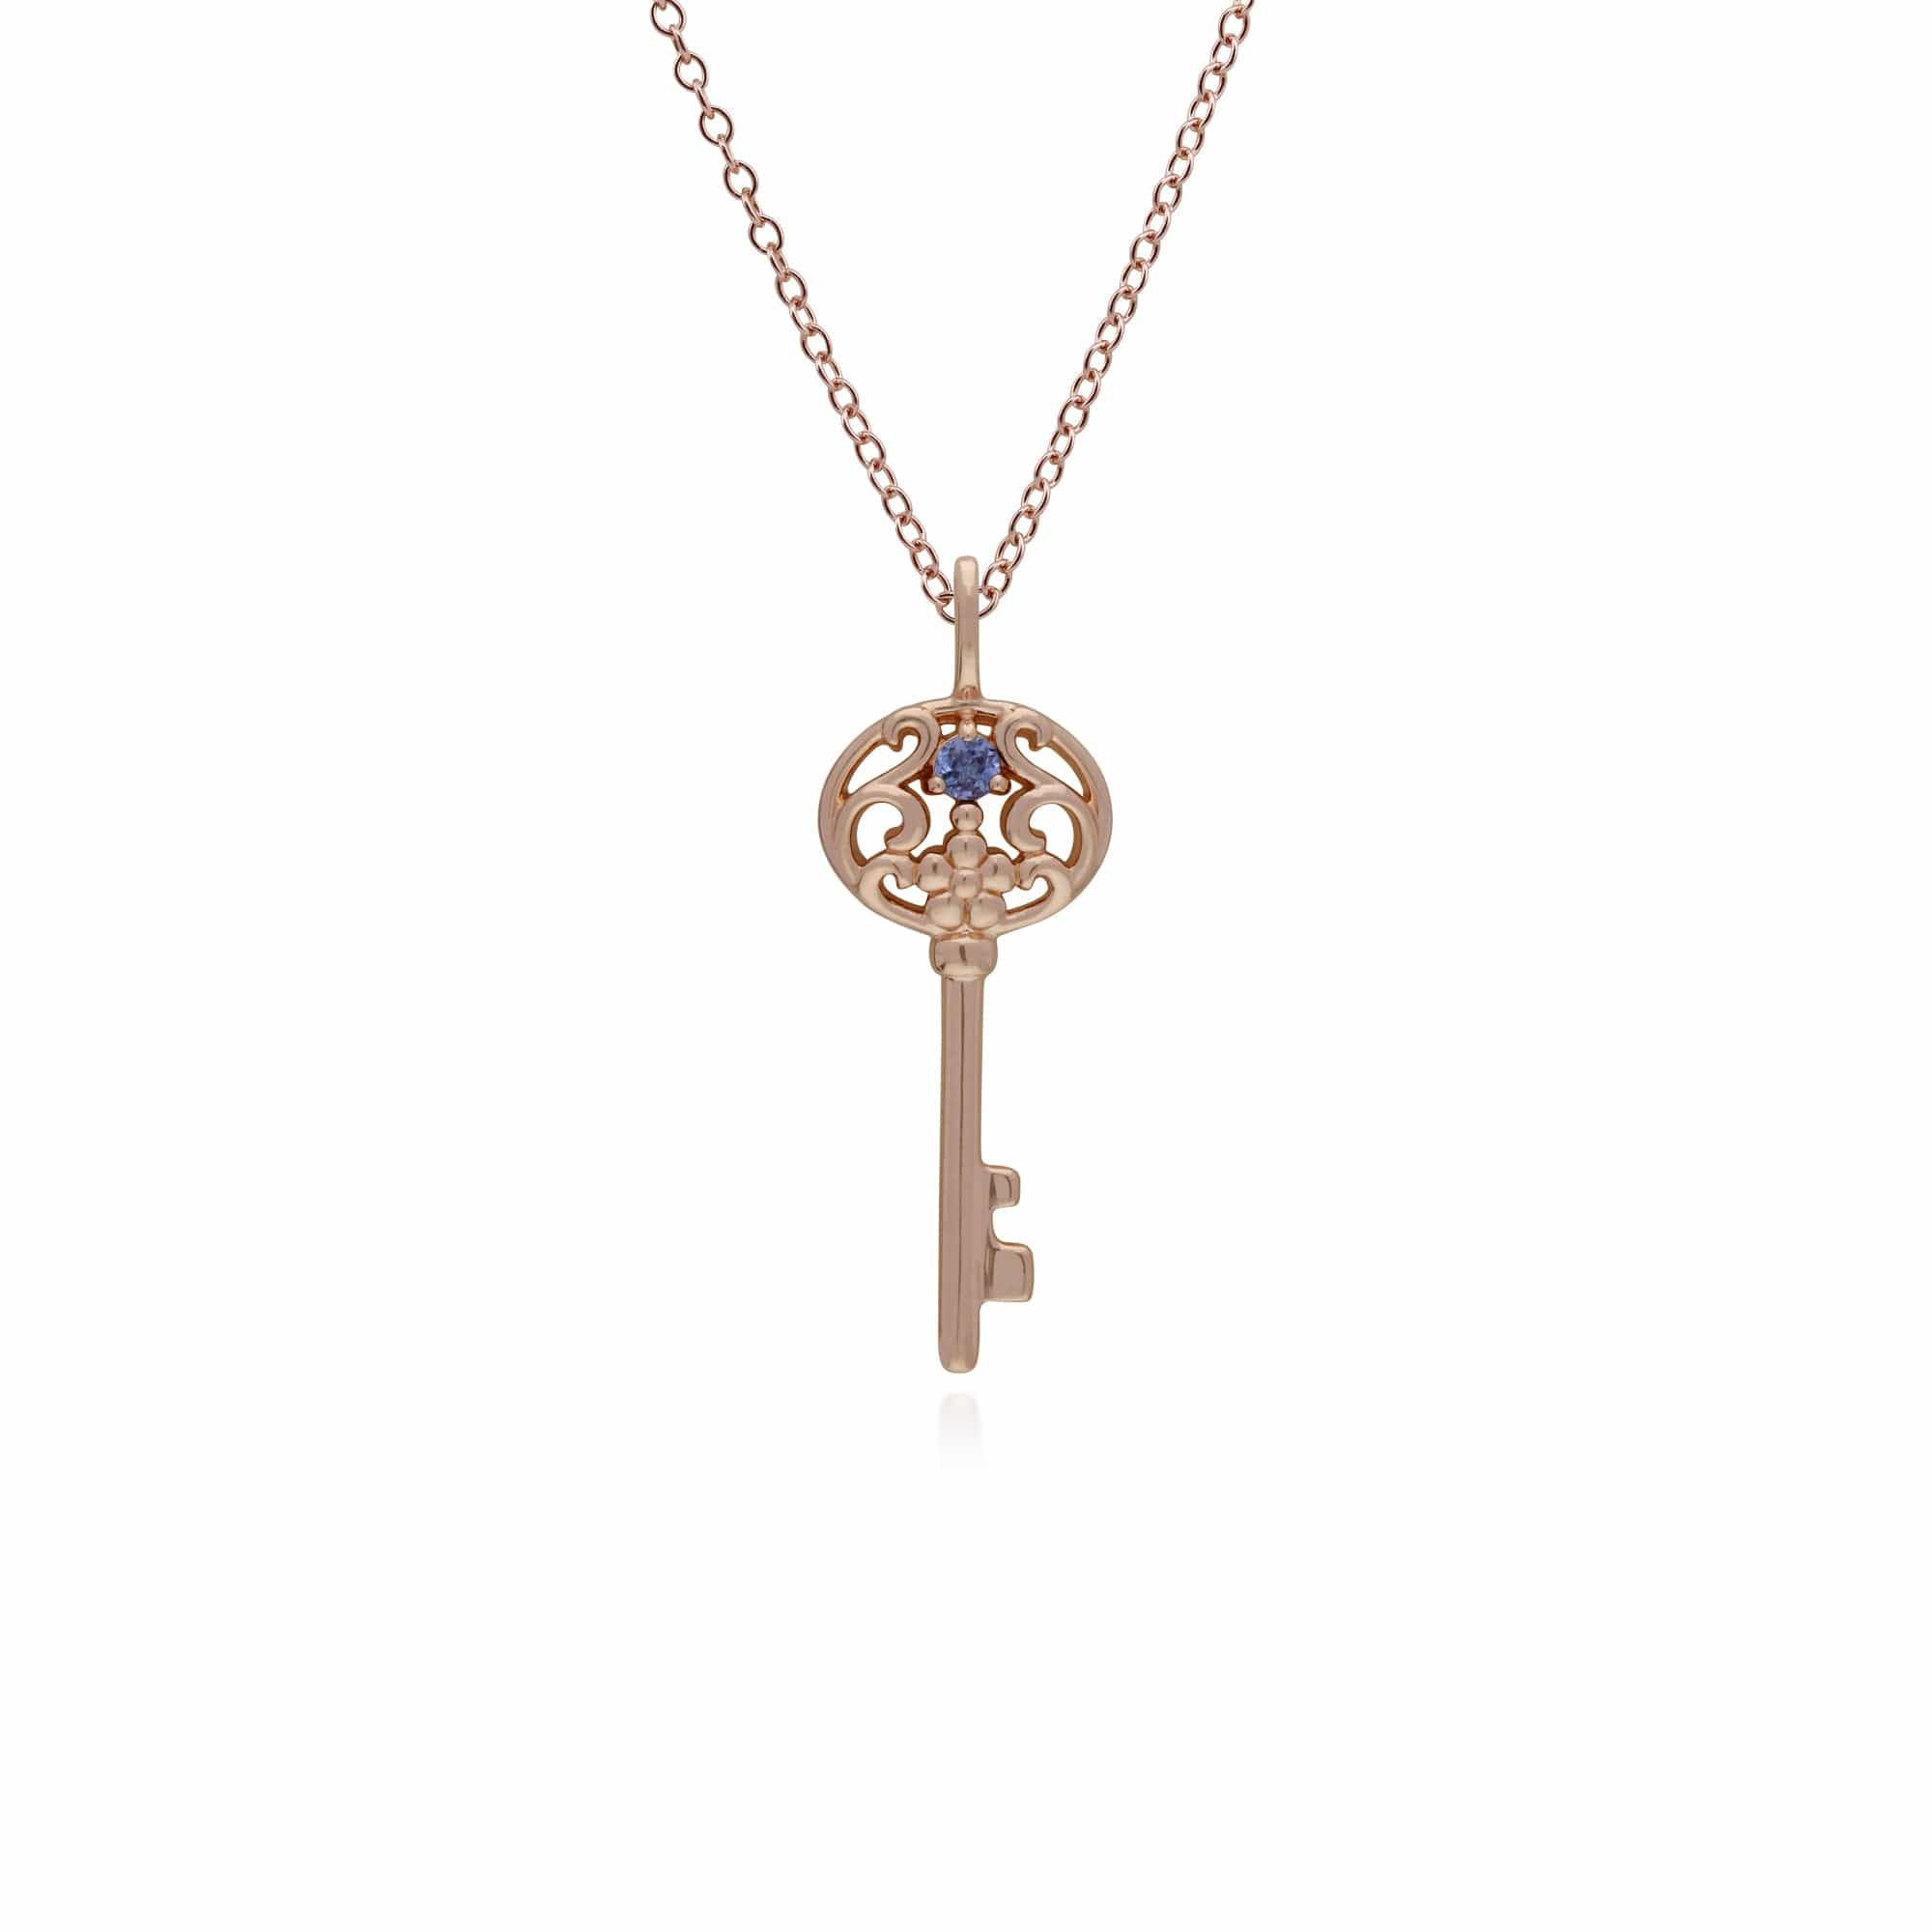 270P026709925-270P026901925 Classic Heart Lock Pendant & Tanzanite Big Key Charm in Rose Gold Plated 925 Sterling Silver 2